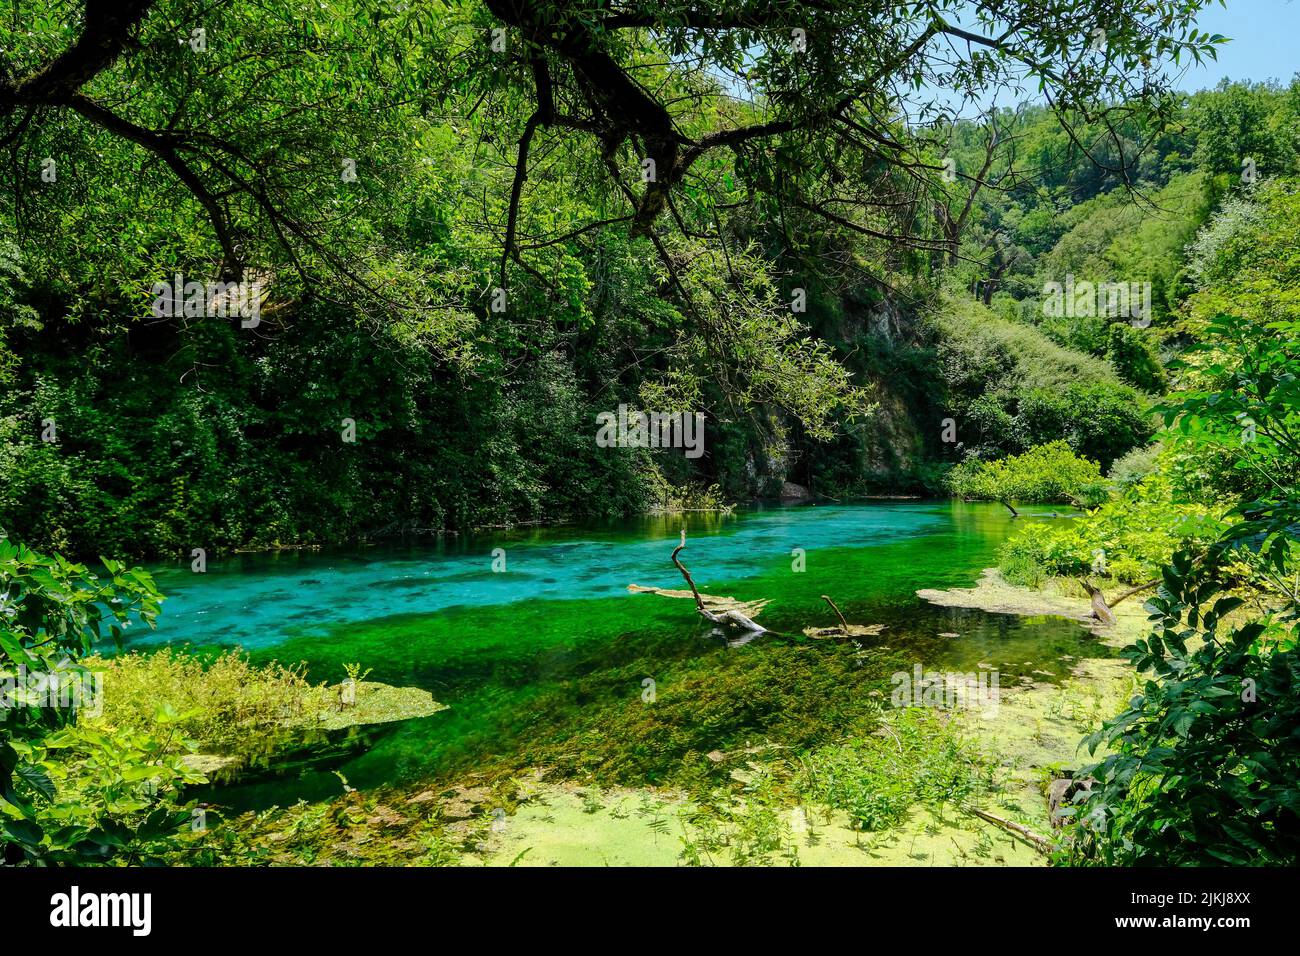 Muzina, Albania - Syri i Kaltër, BLUE EYE, with 6 ö³/s the most abundant source of water in the country, it is located midway between the larger cities of Saranda on the coast and Gjirokastra in the interior. Stock Photo